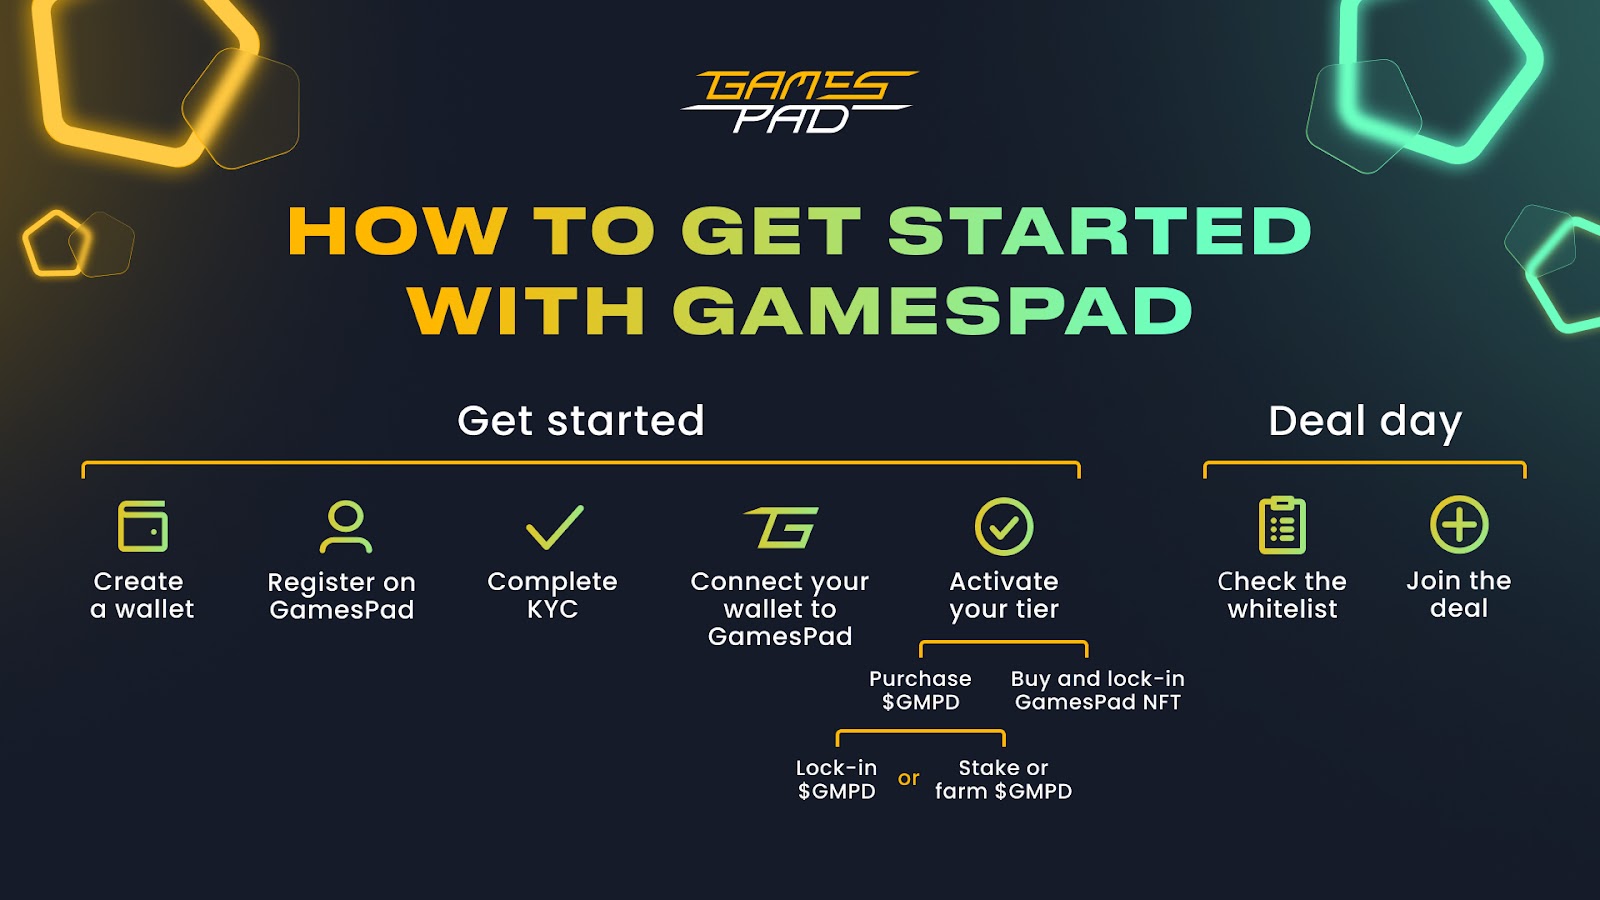 How to Get Started With GamesPad